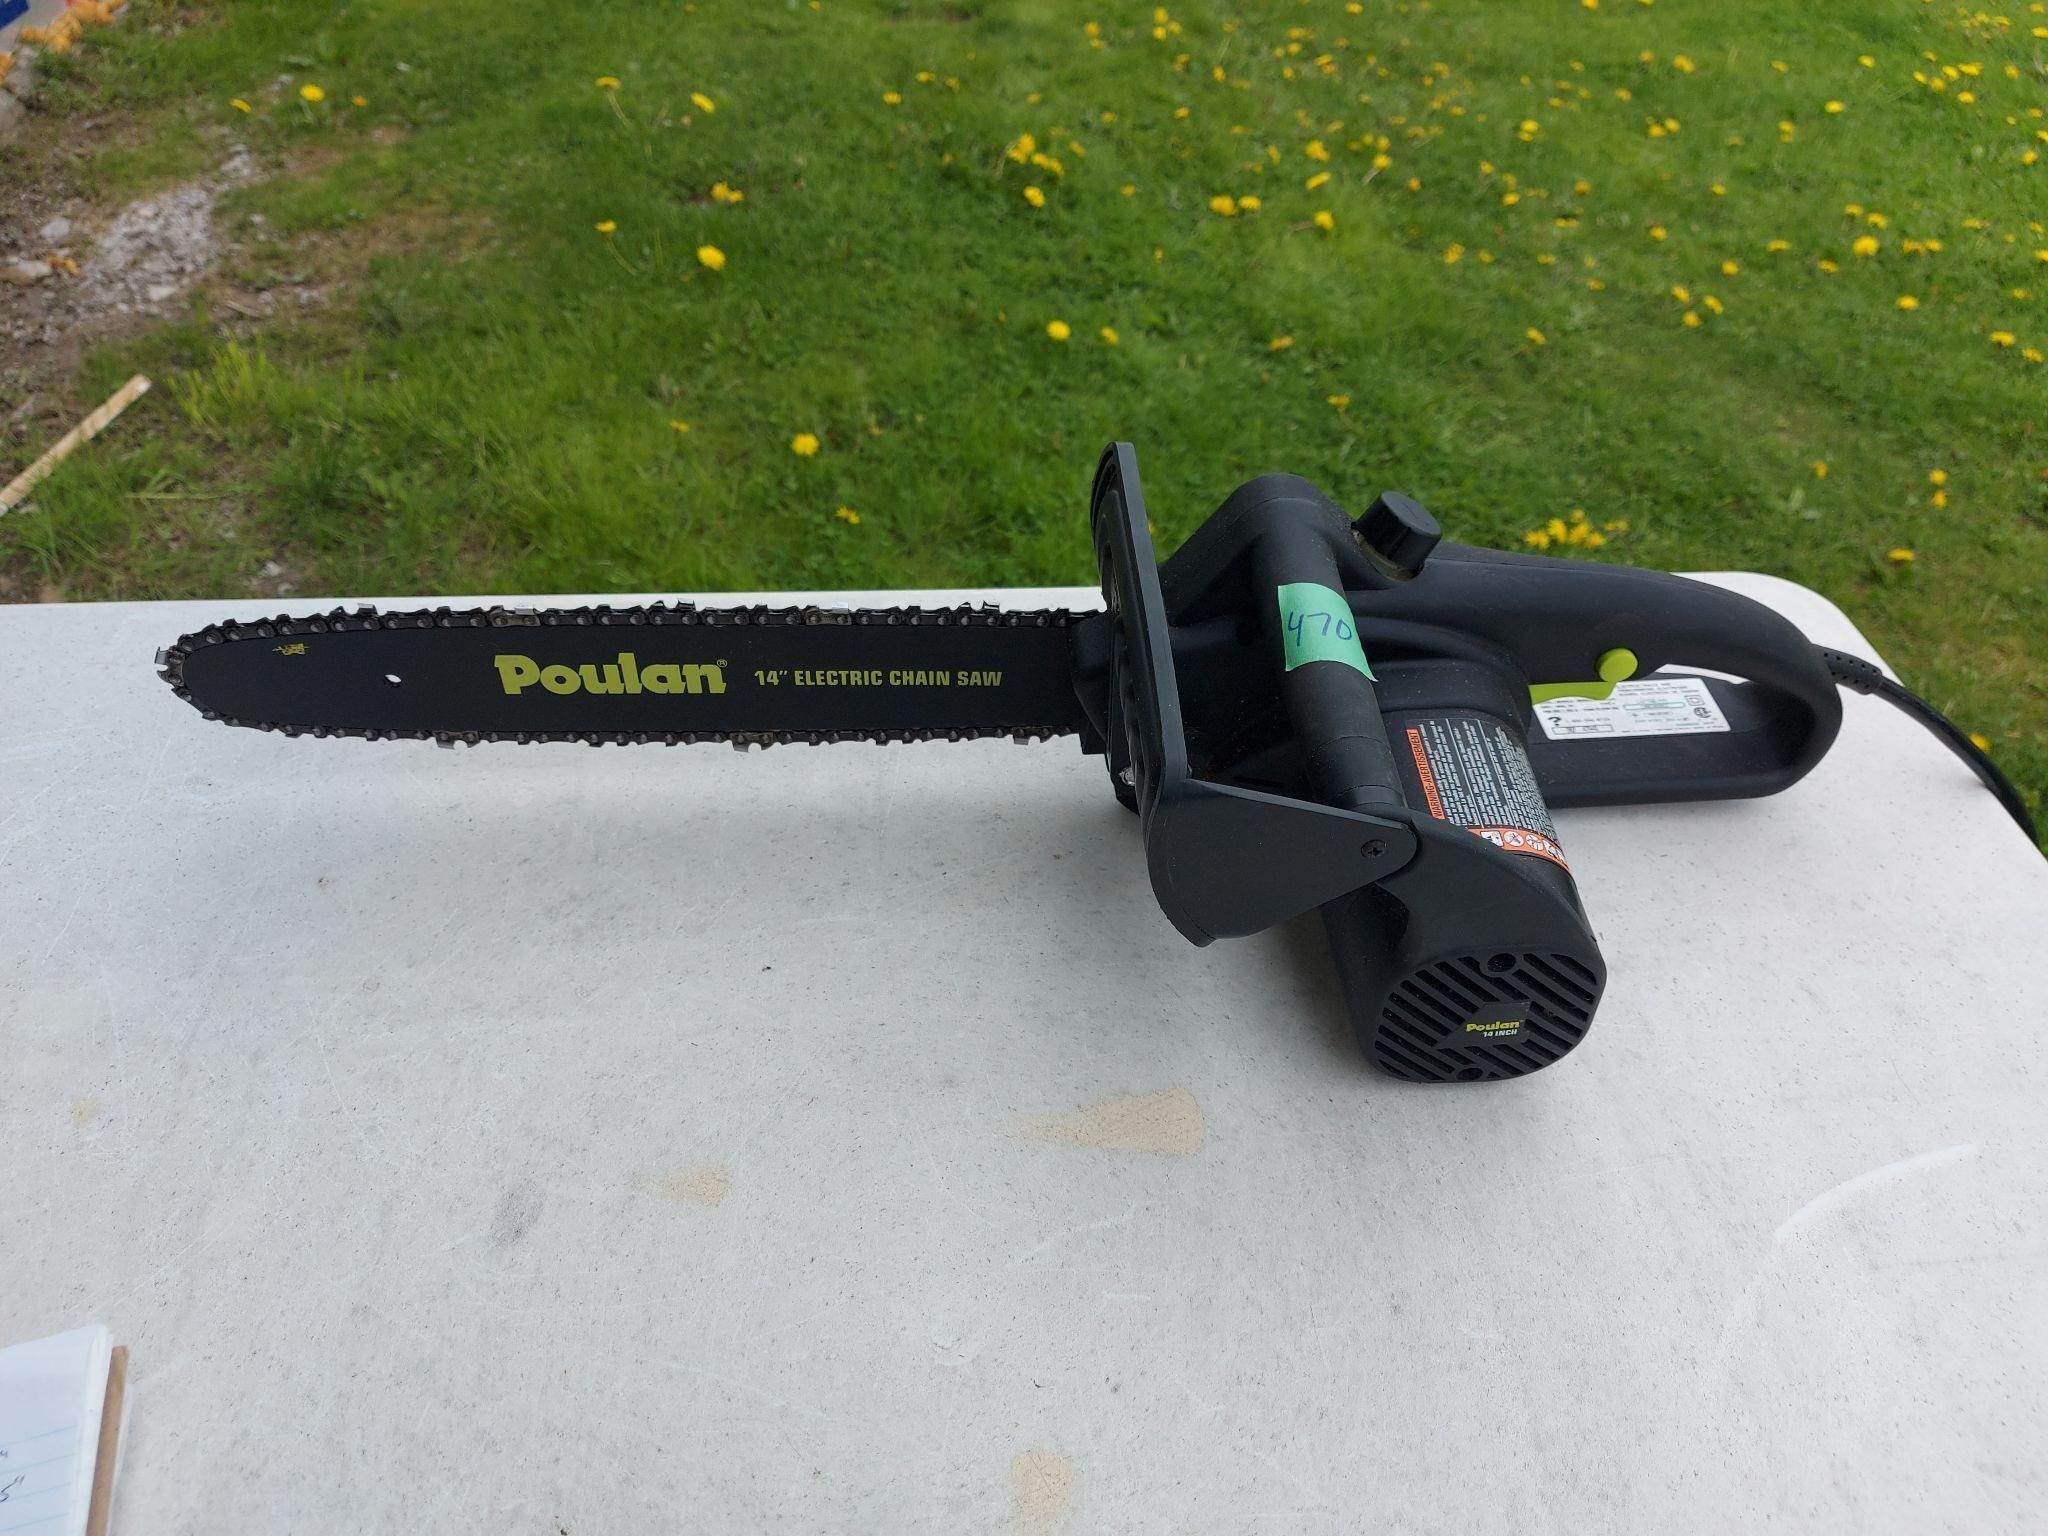 Poulan 14" Electric Chainsaw - Works!